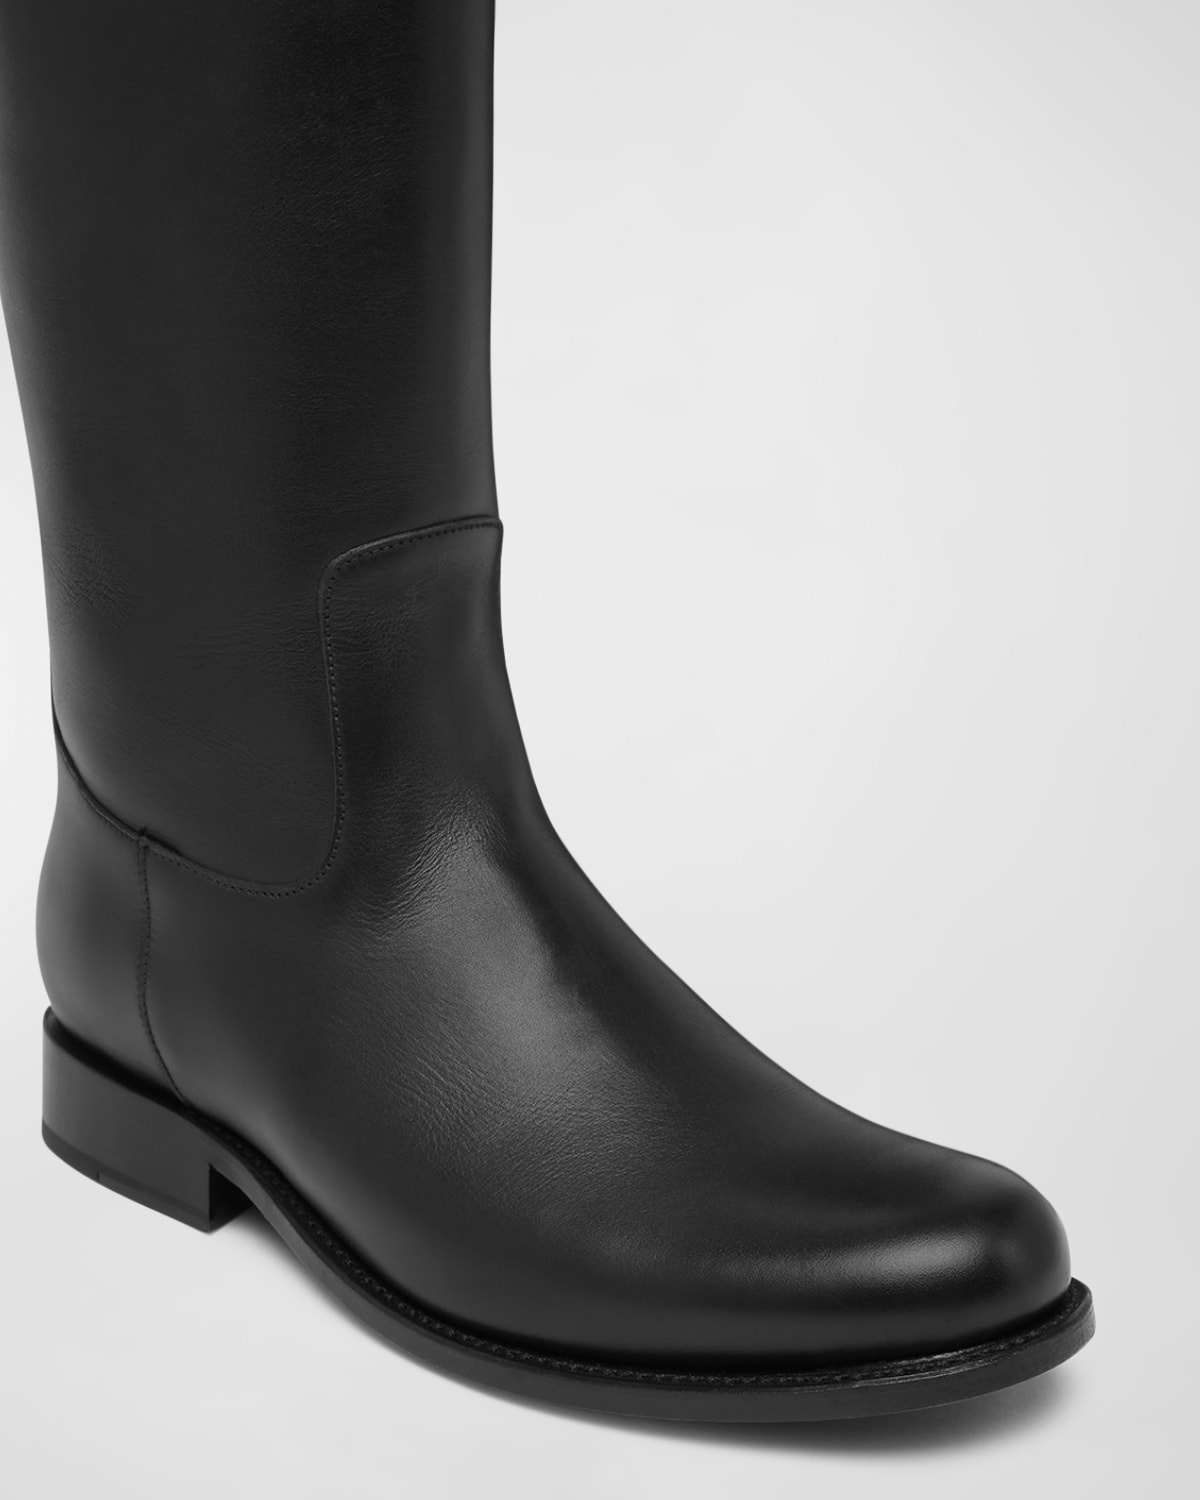 Medusa Leather Riding Boots - 3